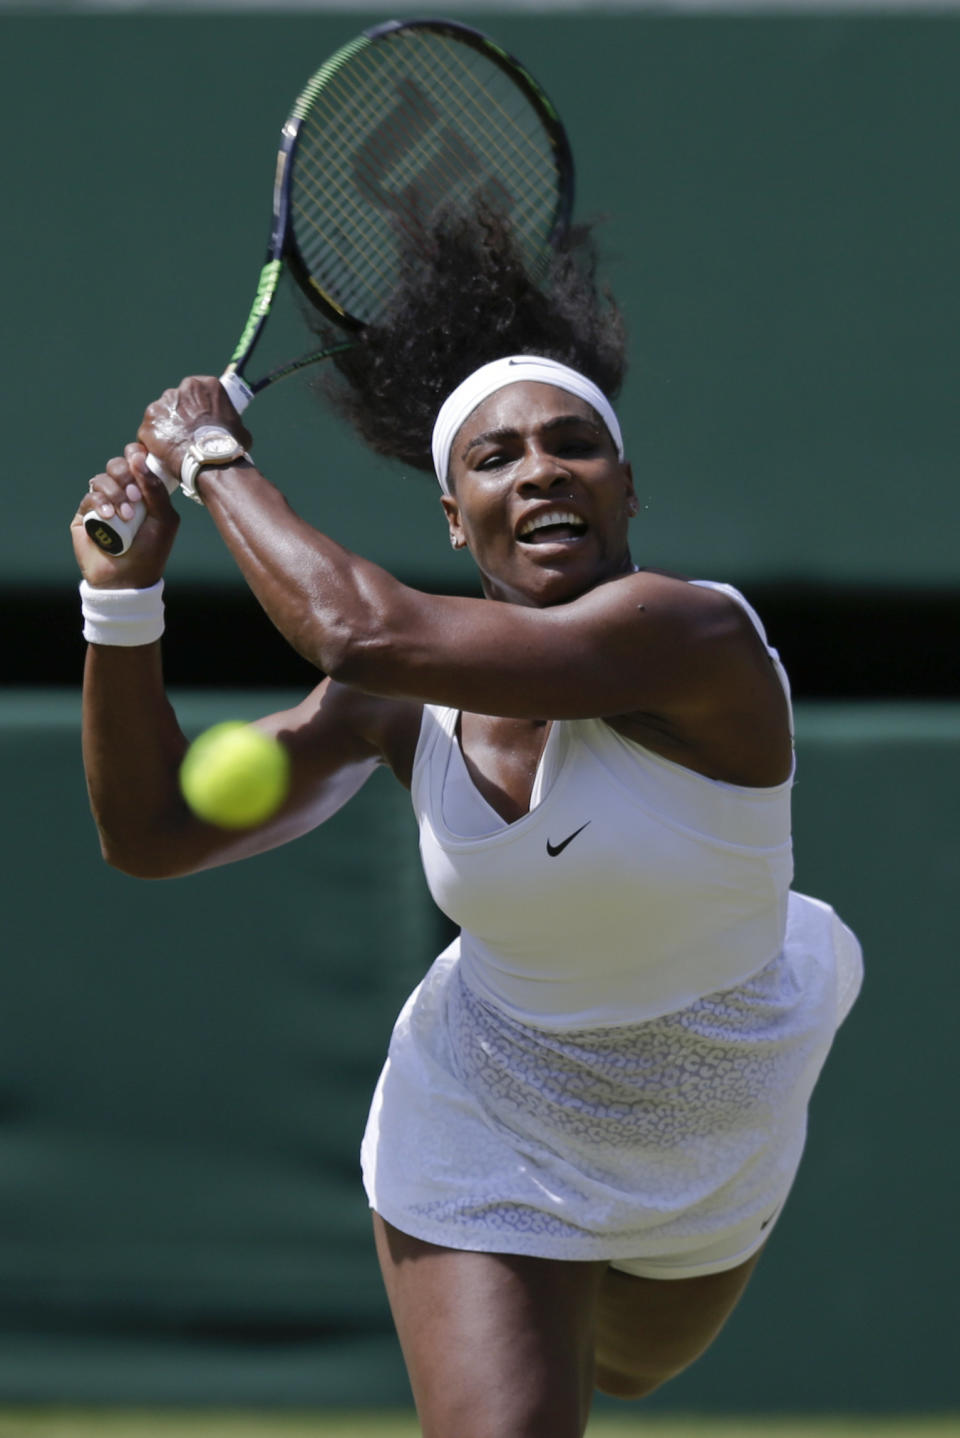 Serena Williams of the United States makes a return to Garbine Muguruza of Spain during the women's singles final at the All England Lawn Tennis Championships in Wimbledon, London, Saturday July 11, 2015. (AP Photo/Pavel Golovkin)